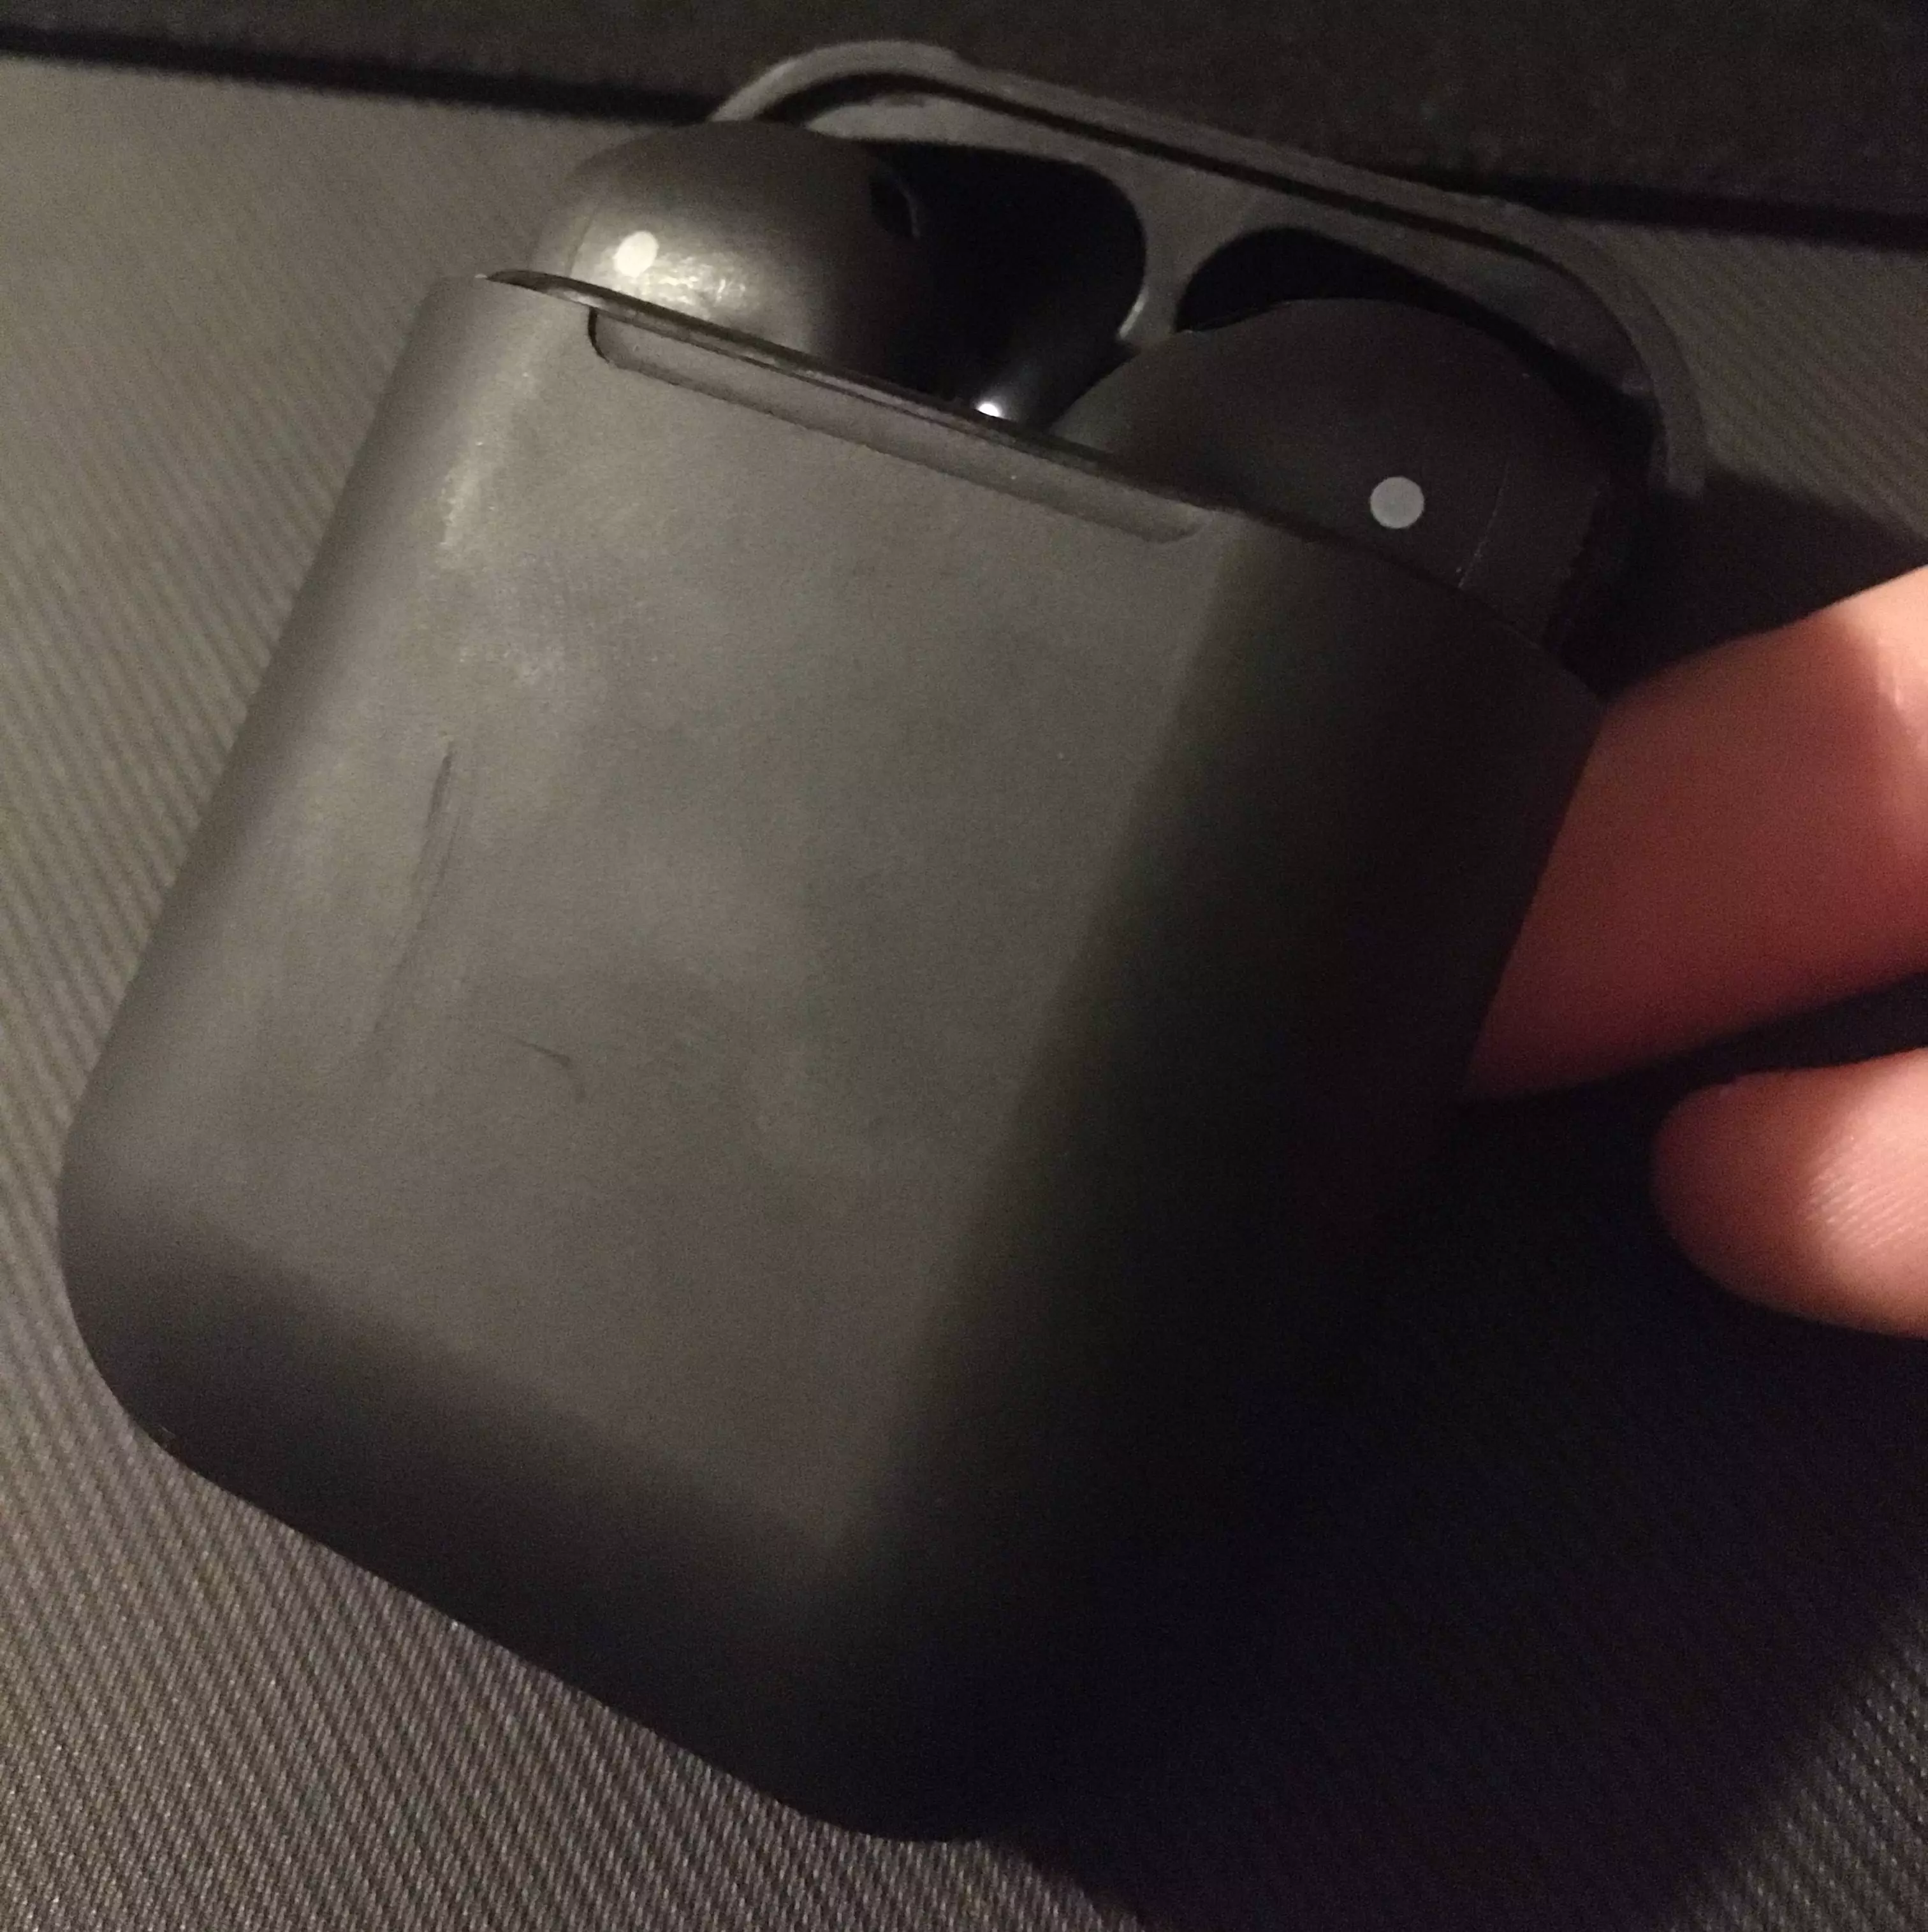 AirPods held slightly tilted with the case lid opened to expose the head of the pods